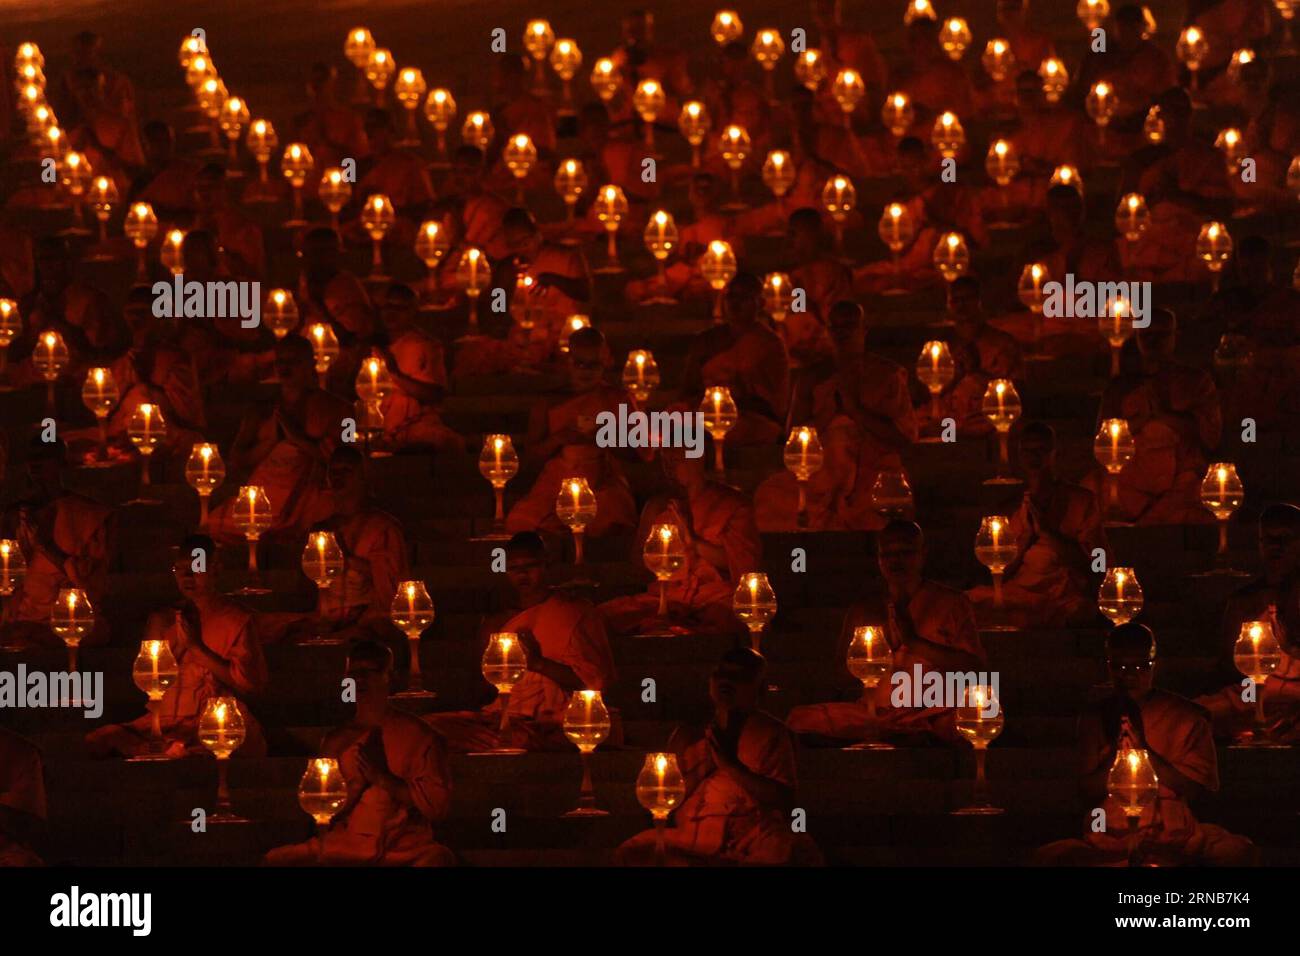 Thai Buddhist monks light candles and pray during Makha Bucha Day ceremonies at Wat Phra Dhammakaya Temple in Pathum Thani Province, Thailand, on Feb. 22, 2016. As one of Thailand s most important Buddhist festivals, Makha Bucha is observed every full moon night of the third month in the Thai lunar calendar. On the Makha Bucha day, people flock to temples and venerate Buddhas as well as pray for blessedness. ) THAILAND-PATHUM THANI-MAKHA BUCHA DAY RachenxSageamsak PUBLICATIONxNOTxINxCHN   Thai Buddhist Monks Light Candles and Pray during Makha Bucha Day Ceremonies AT Wat Phra Dhammakaya Temple Stock Photo